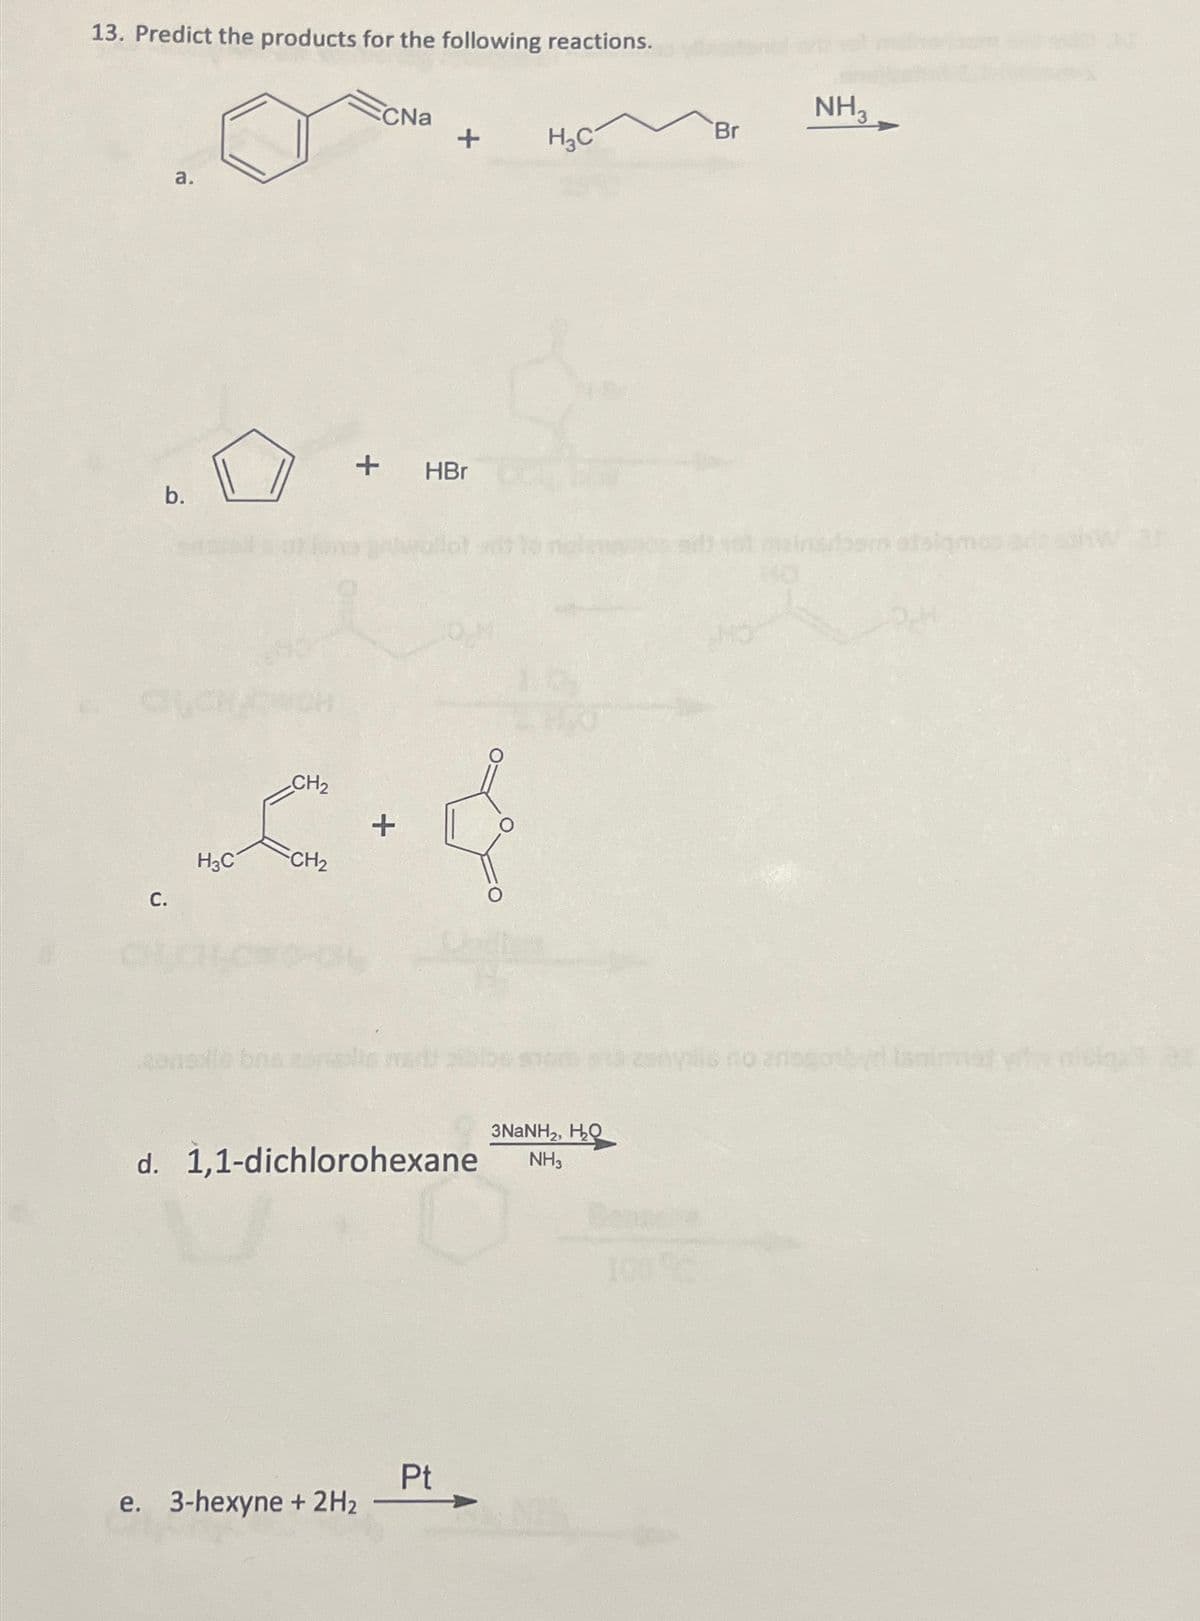 13. Predict the products for the following reactions.
a.
b.
C.
H3C
CH₂
CH₂
CNa
+ HBr
e. 3-hexyne + 2H₂
+
+
d. 1,1-dichlorohexane
Pt
H₂C
3NaNH,, HQ
NH3
100%
Br
NH3